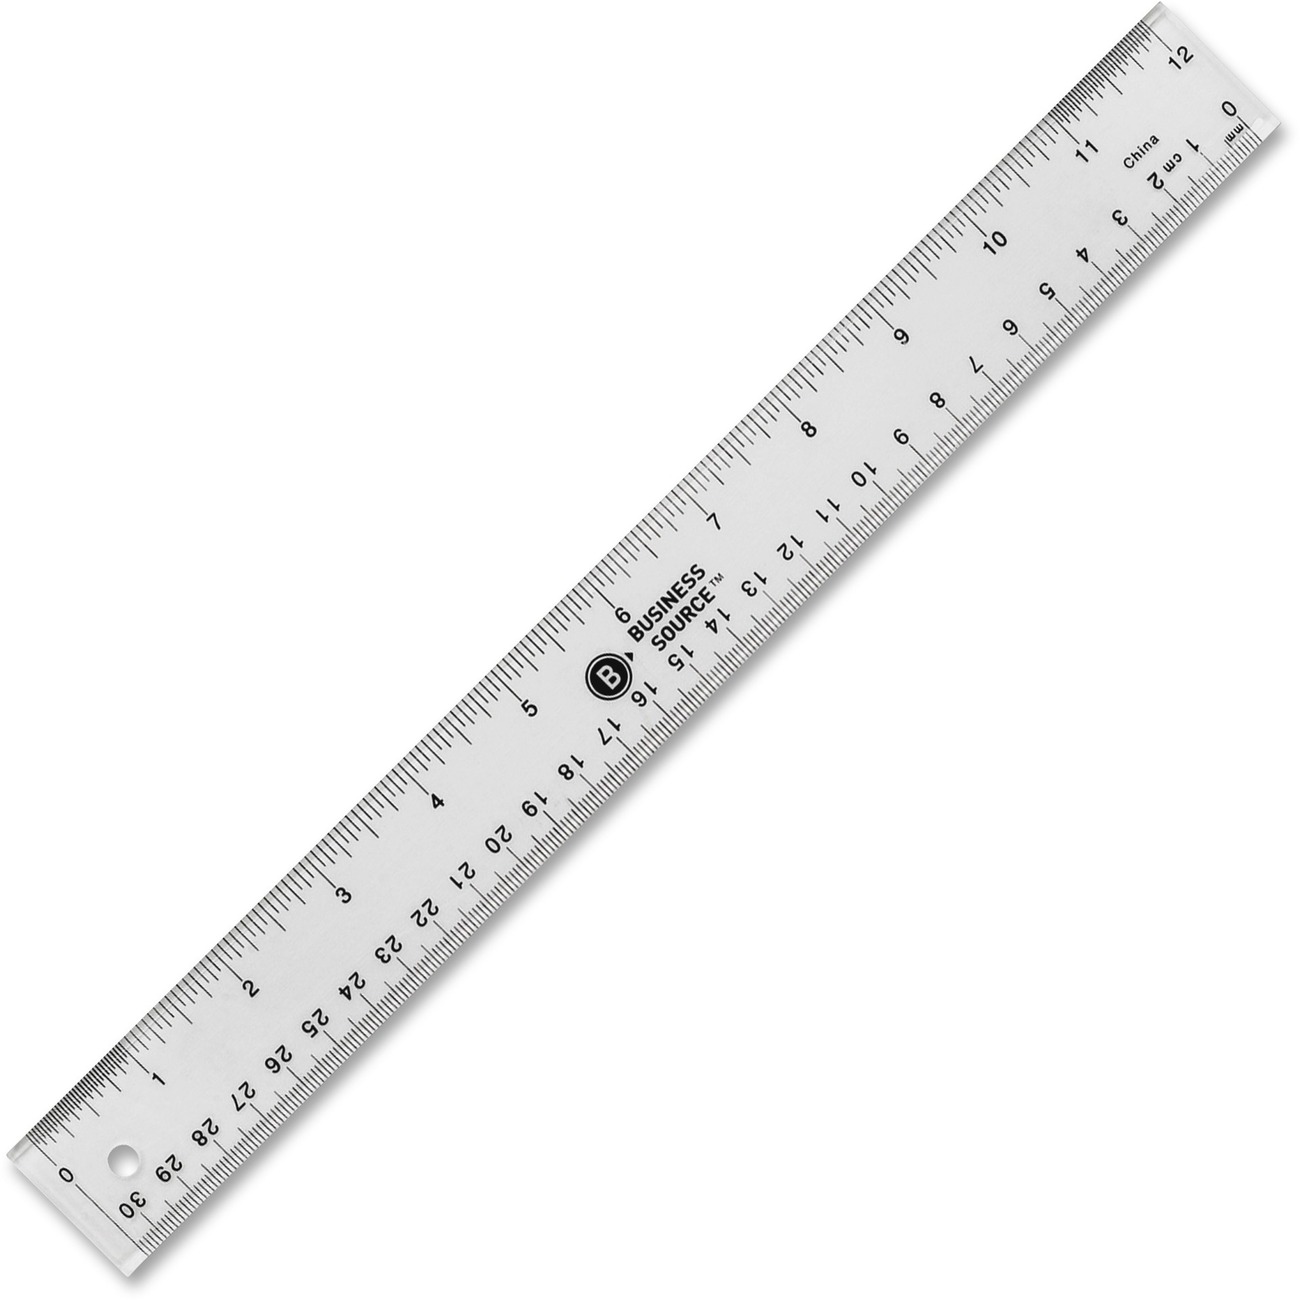 22 inches ruler online